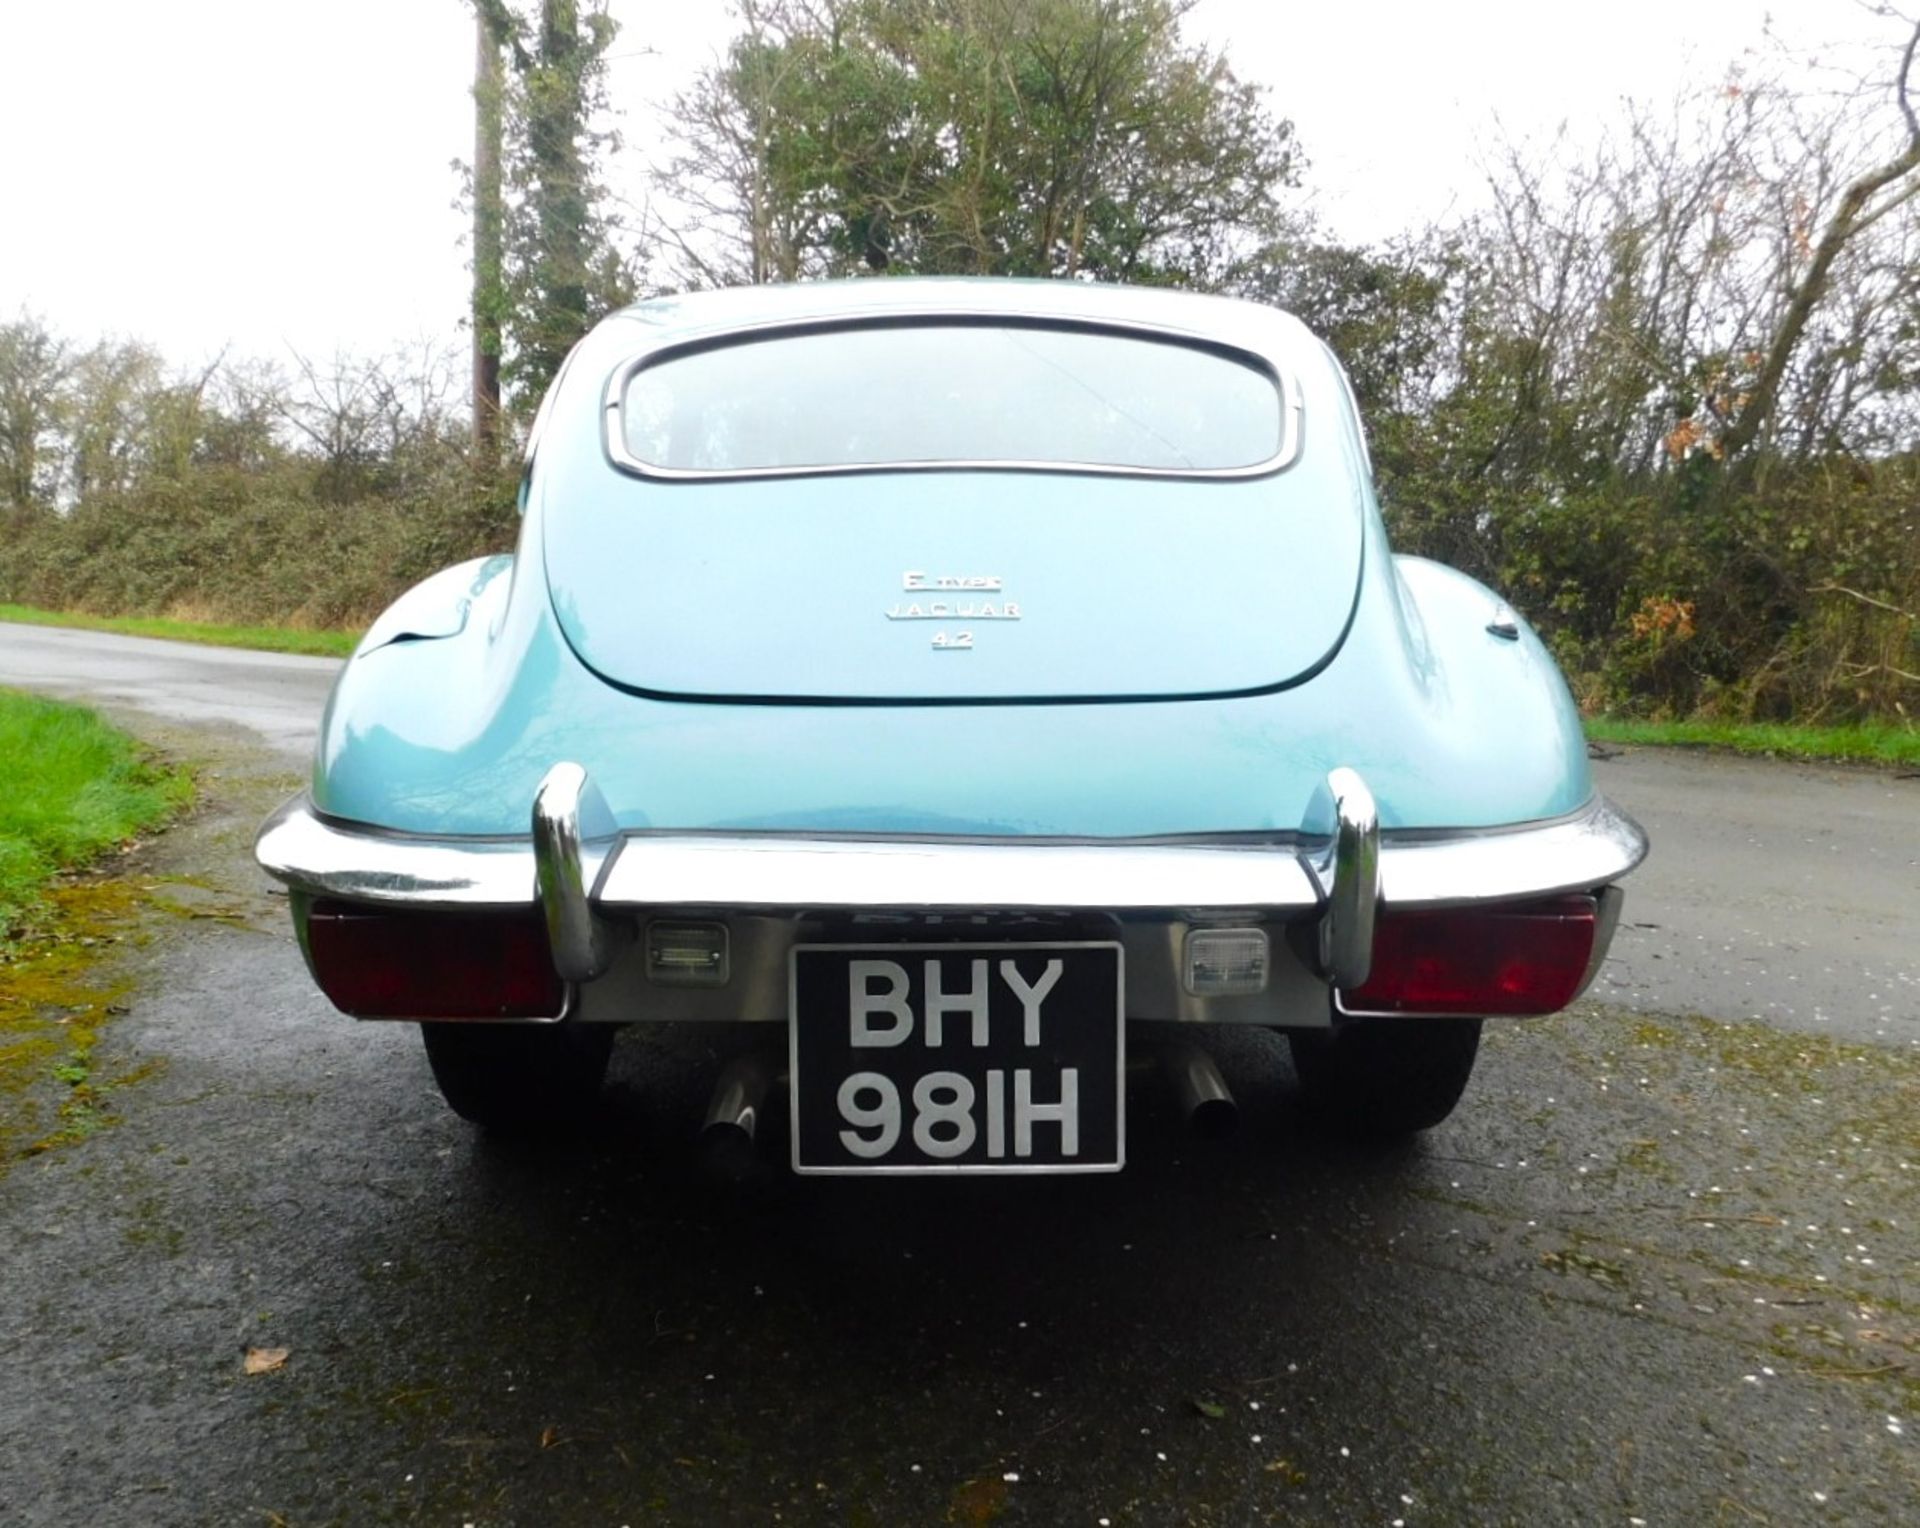 1970 JAGUAR E-TYPE SERIES II 2+2 COUPE Registration Number: BHY 981H Chassis Number: P1R44144BW - Image 6 of 33